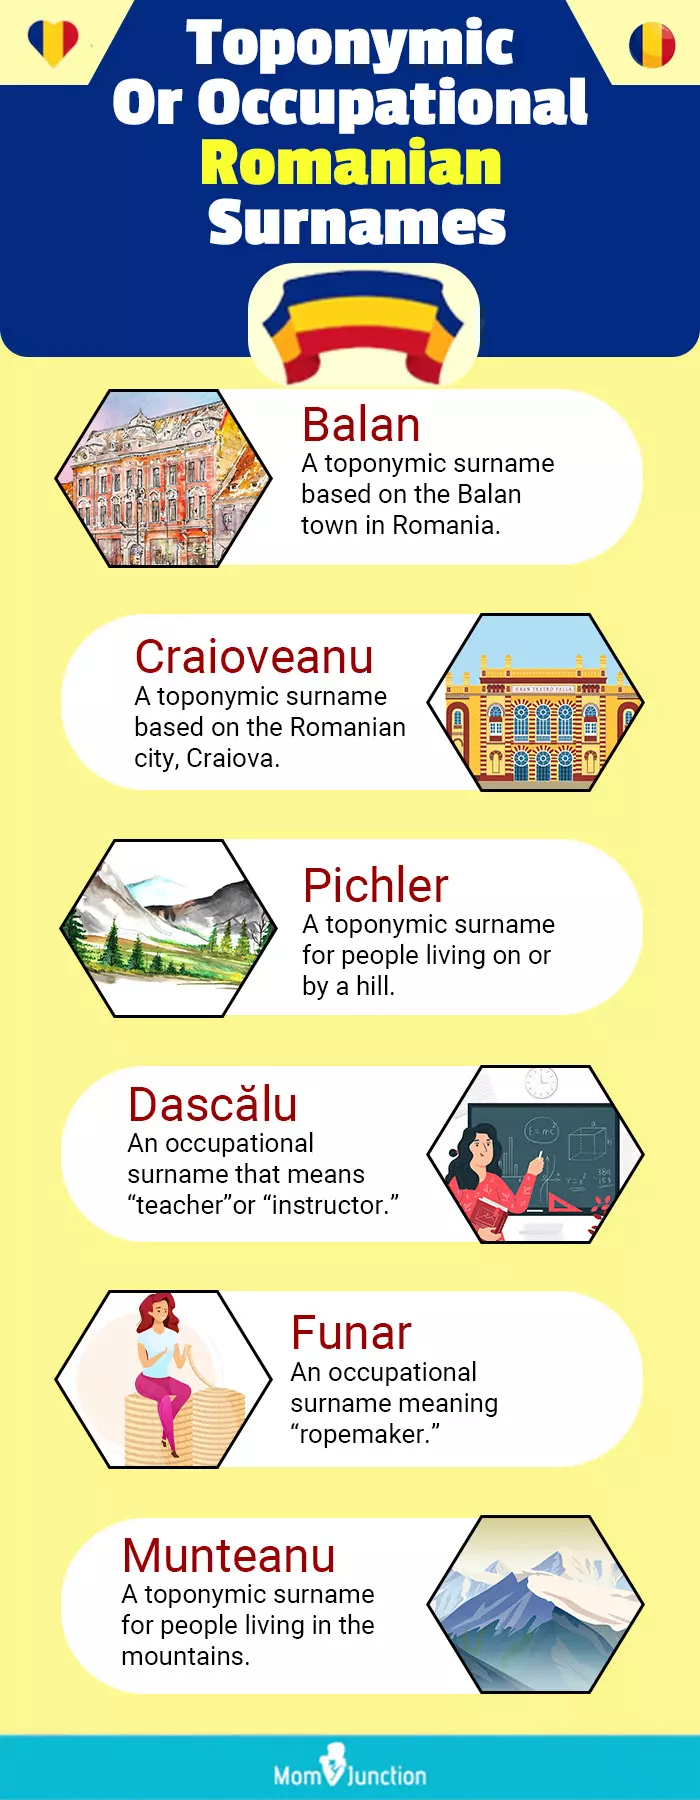 toponymic or occupational romanian surnames (infographic)